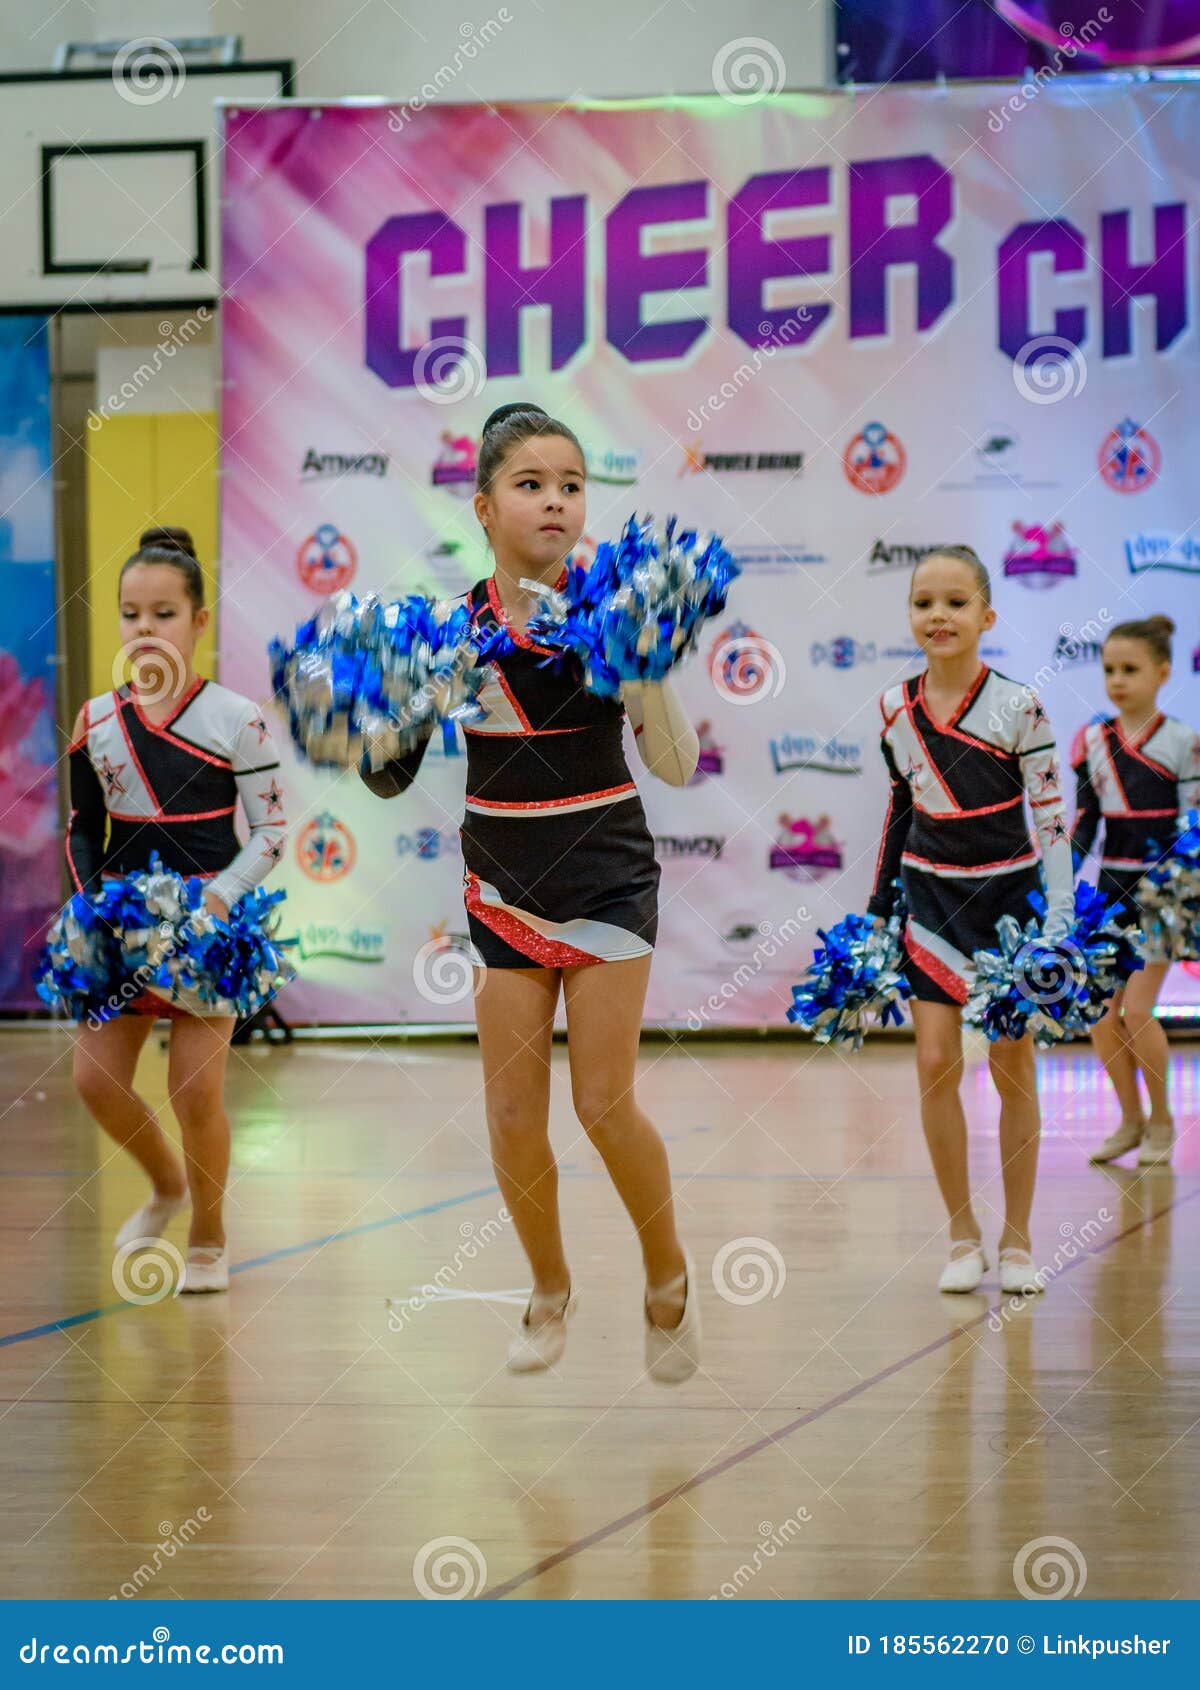 Moscow, Russia - December 22, 2019: Sports Dance Little Girls with